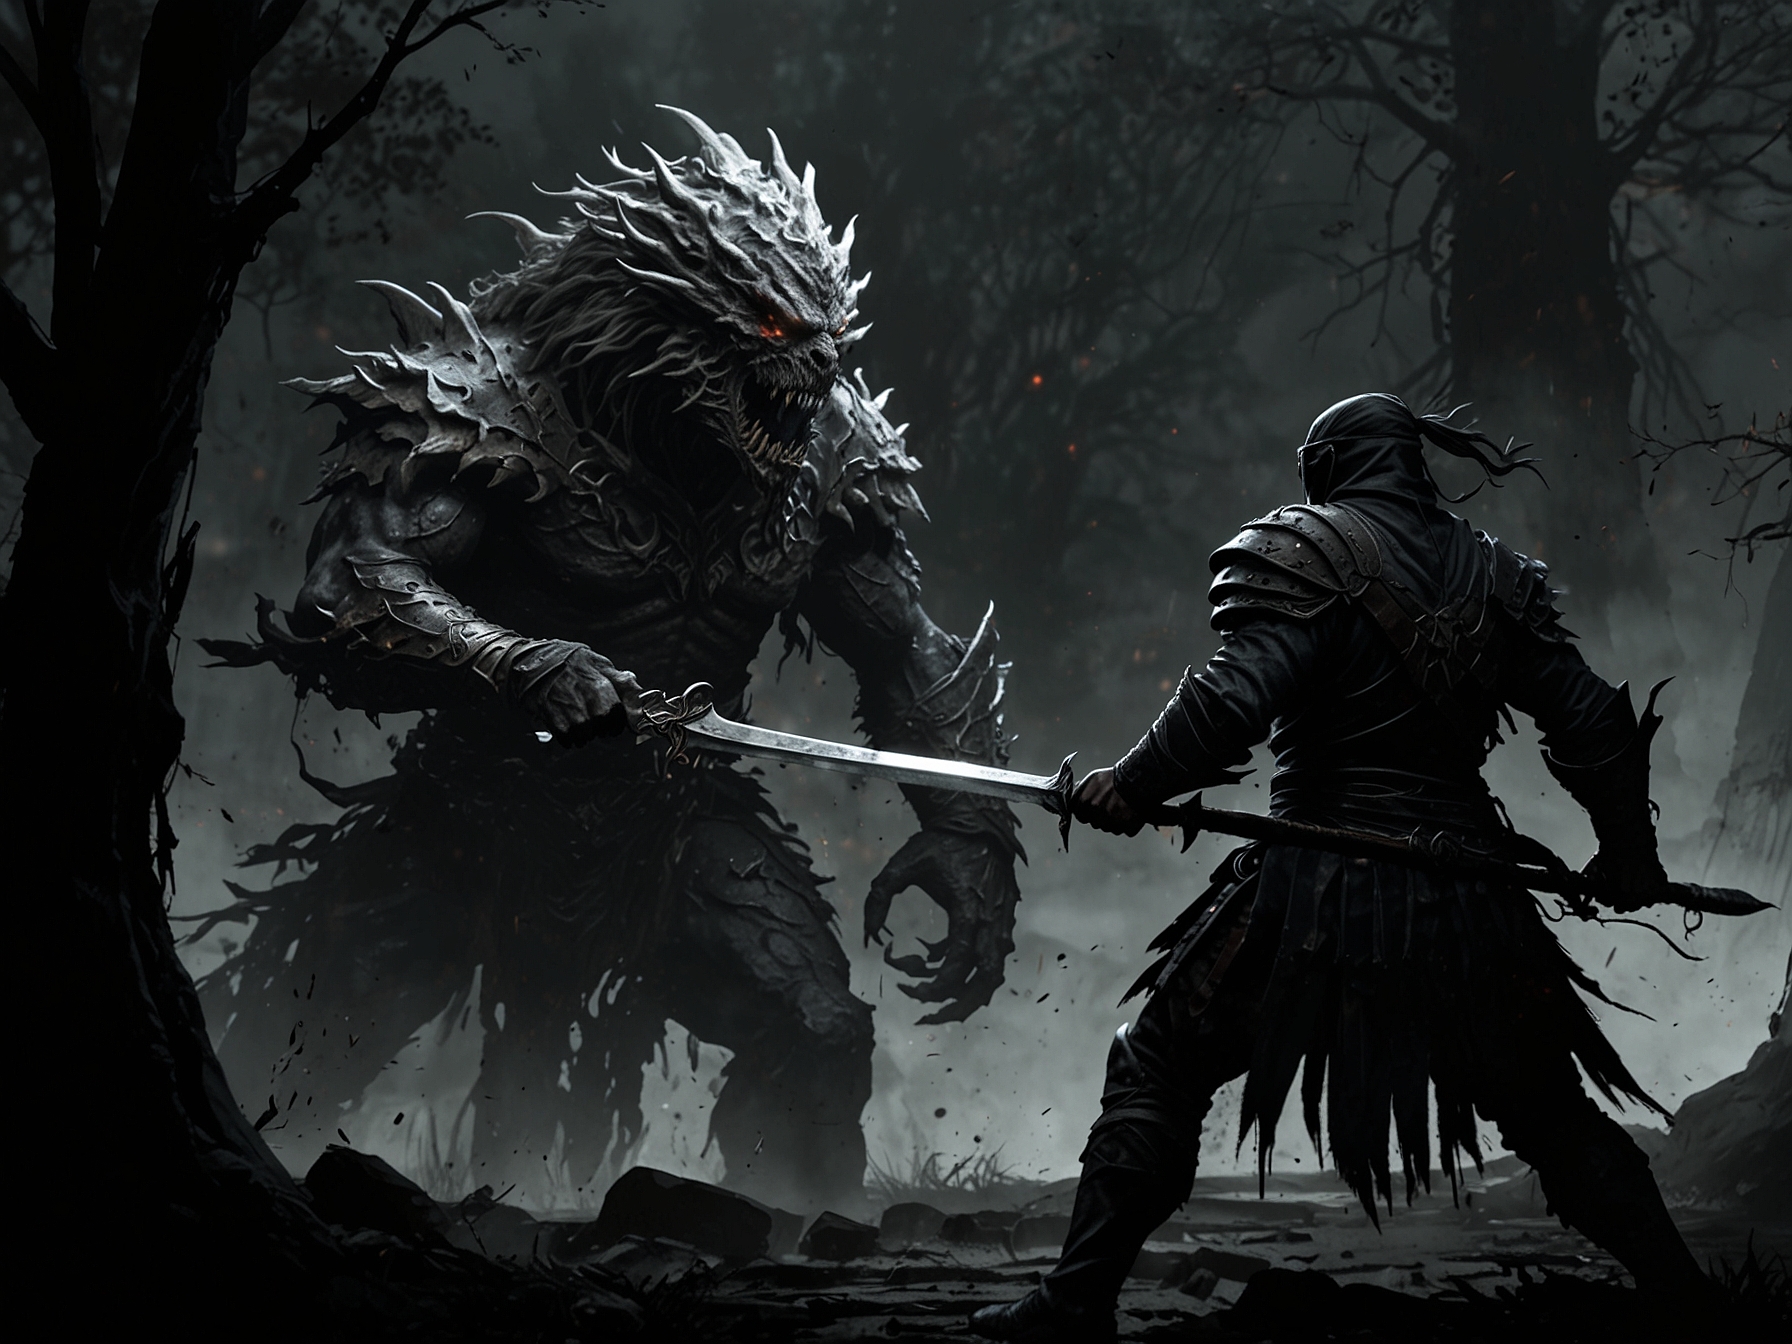 A player character in Elden Ring faces off against the final boss of the Shadow of the Erdtree expansion, poised to execute a perfect parry amid a chaotic and intense battle scene.